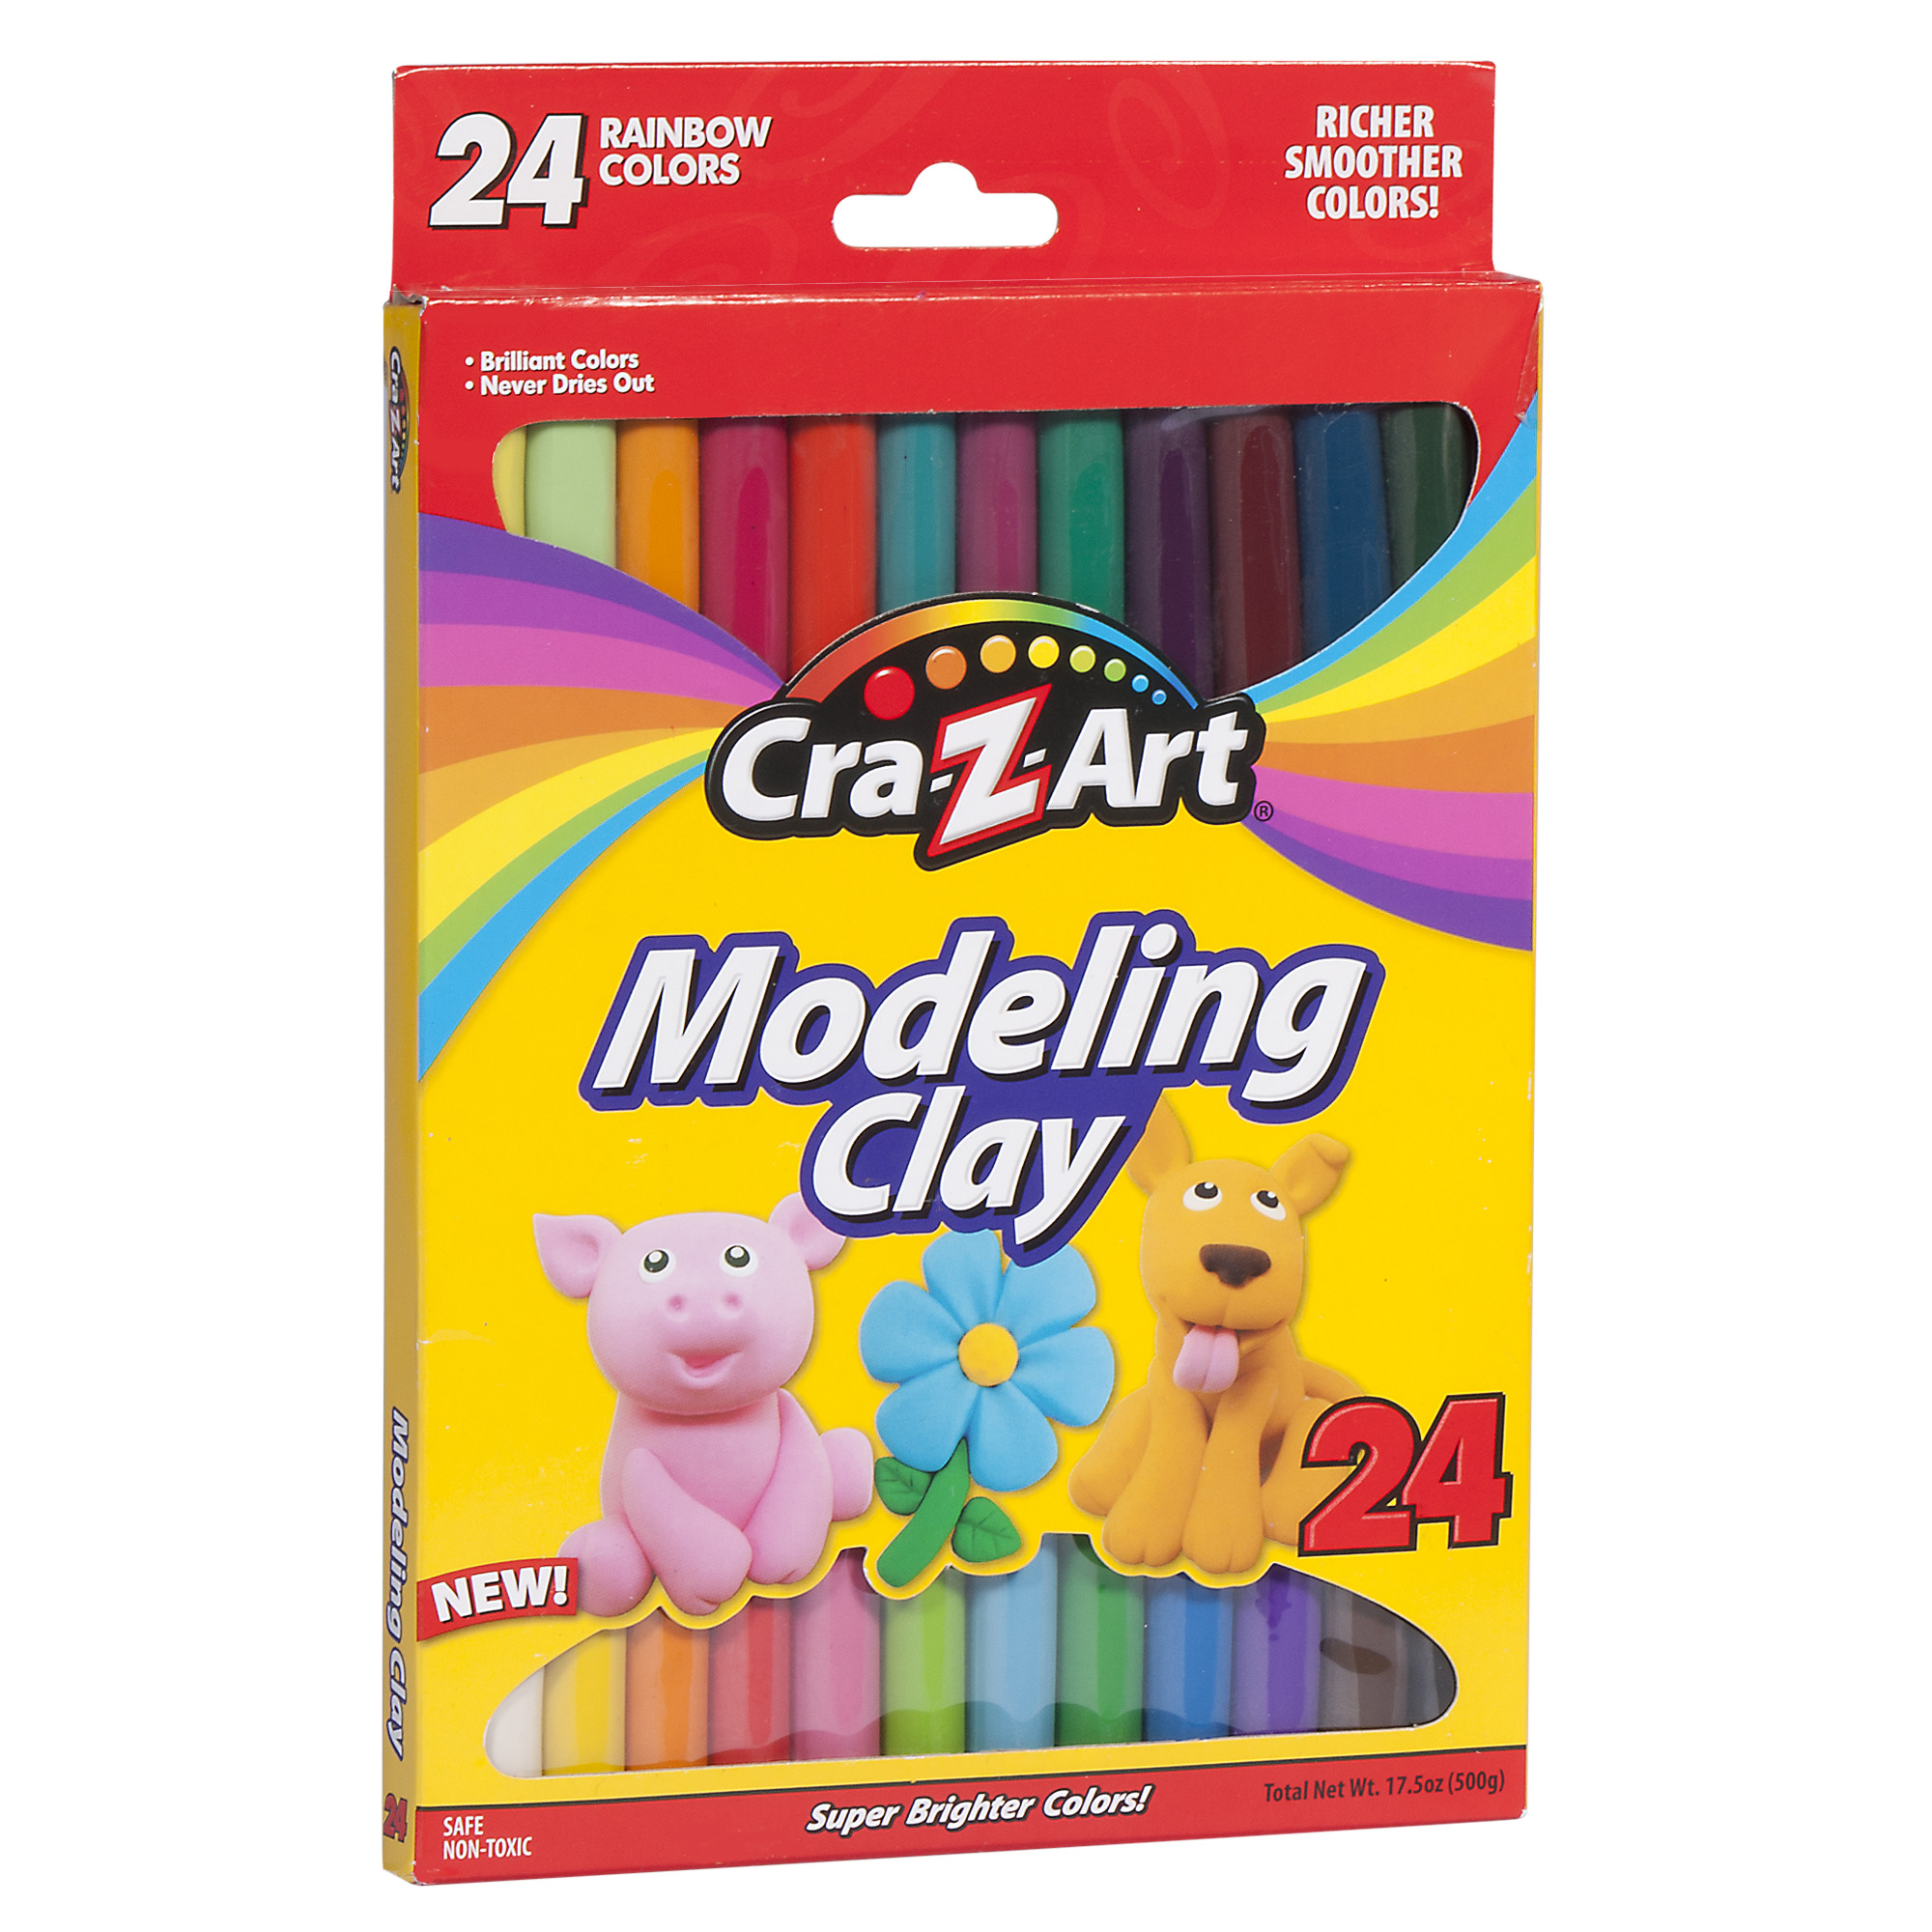 Cra-Z-Art Modeling Clay, 24 Count, Back to School Supplies - image 2 of 3